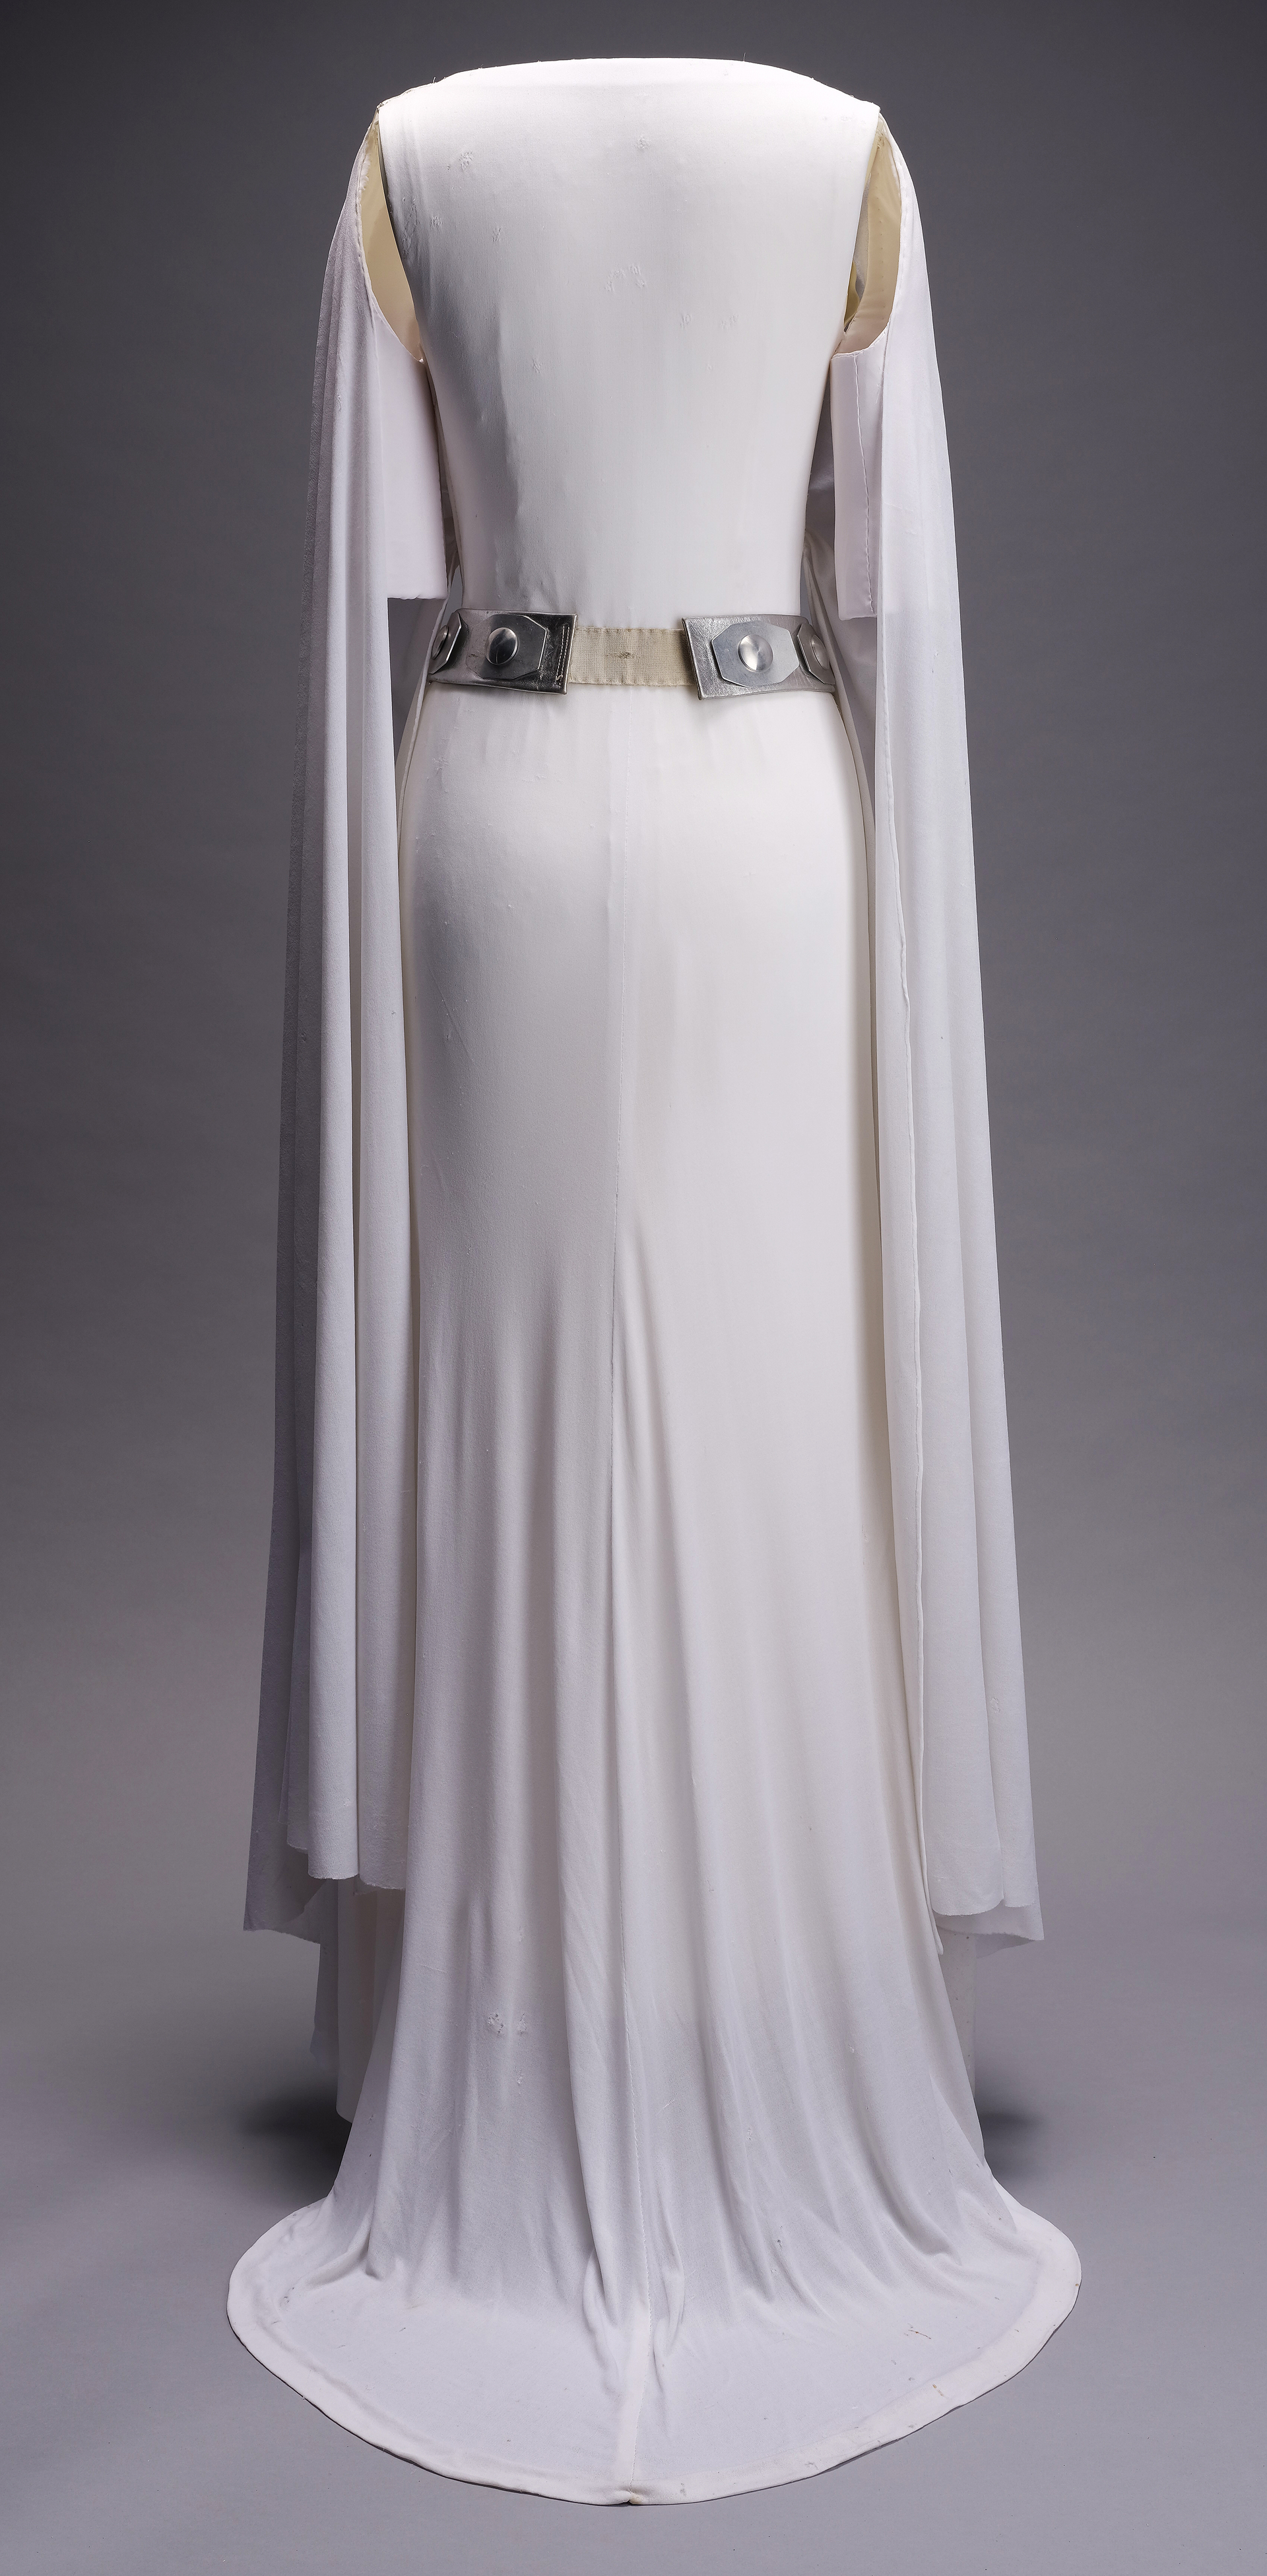 STAR WARS: A NEW HOPE (1977) - Princess Leia's (Carrie Fisher) Screen-Matched Ceremonial Dress - Image 6 of 39